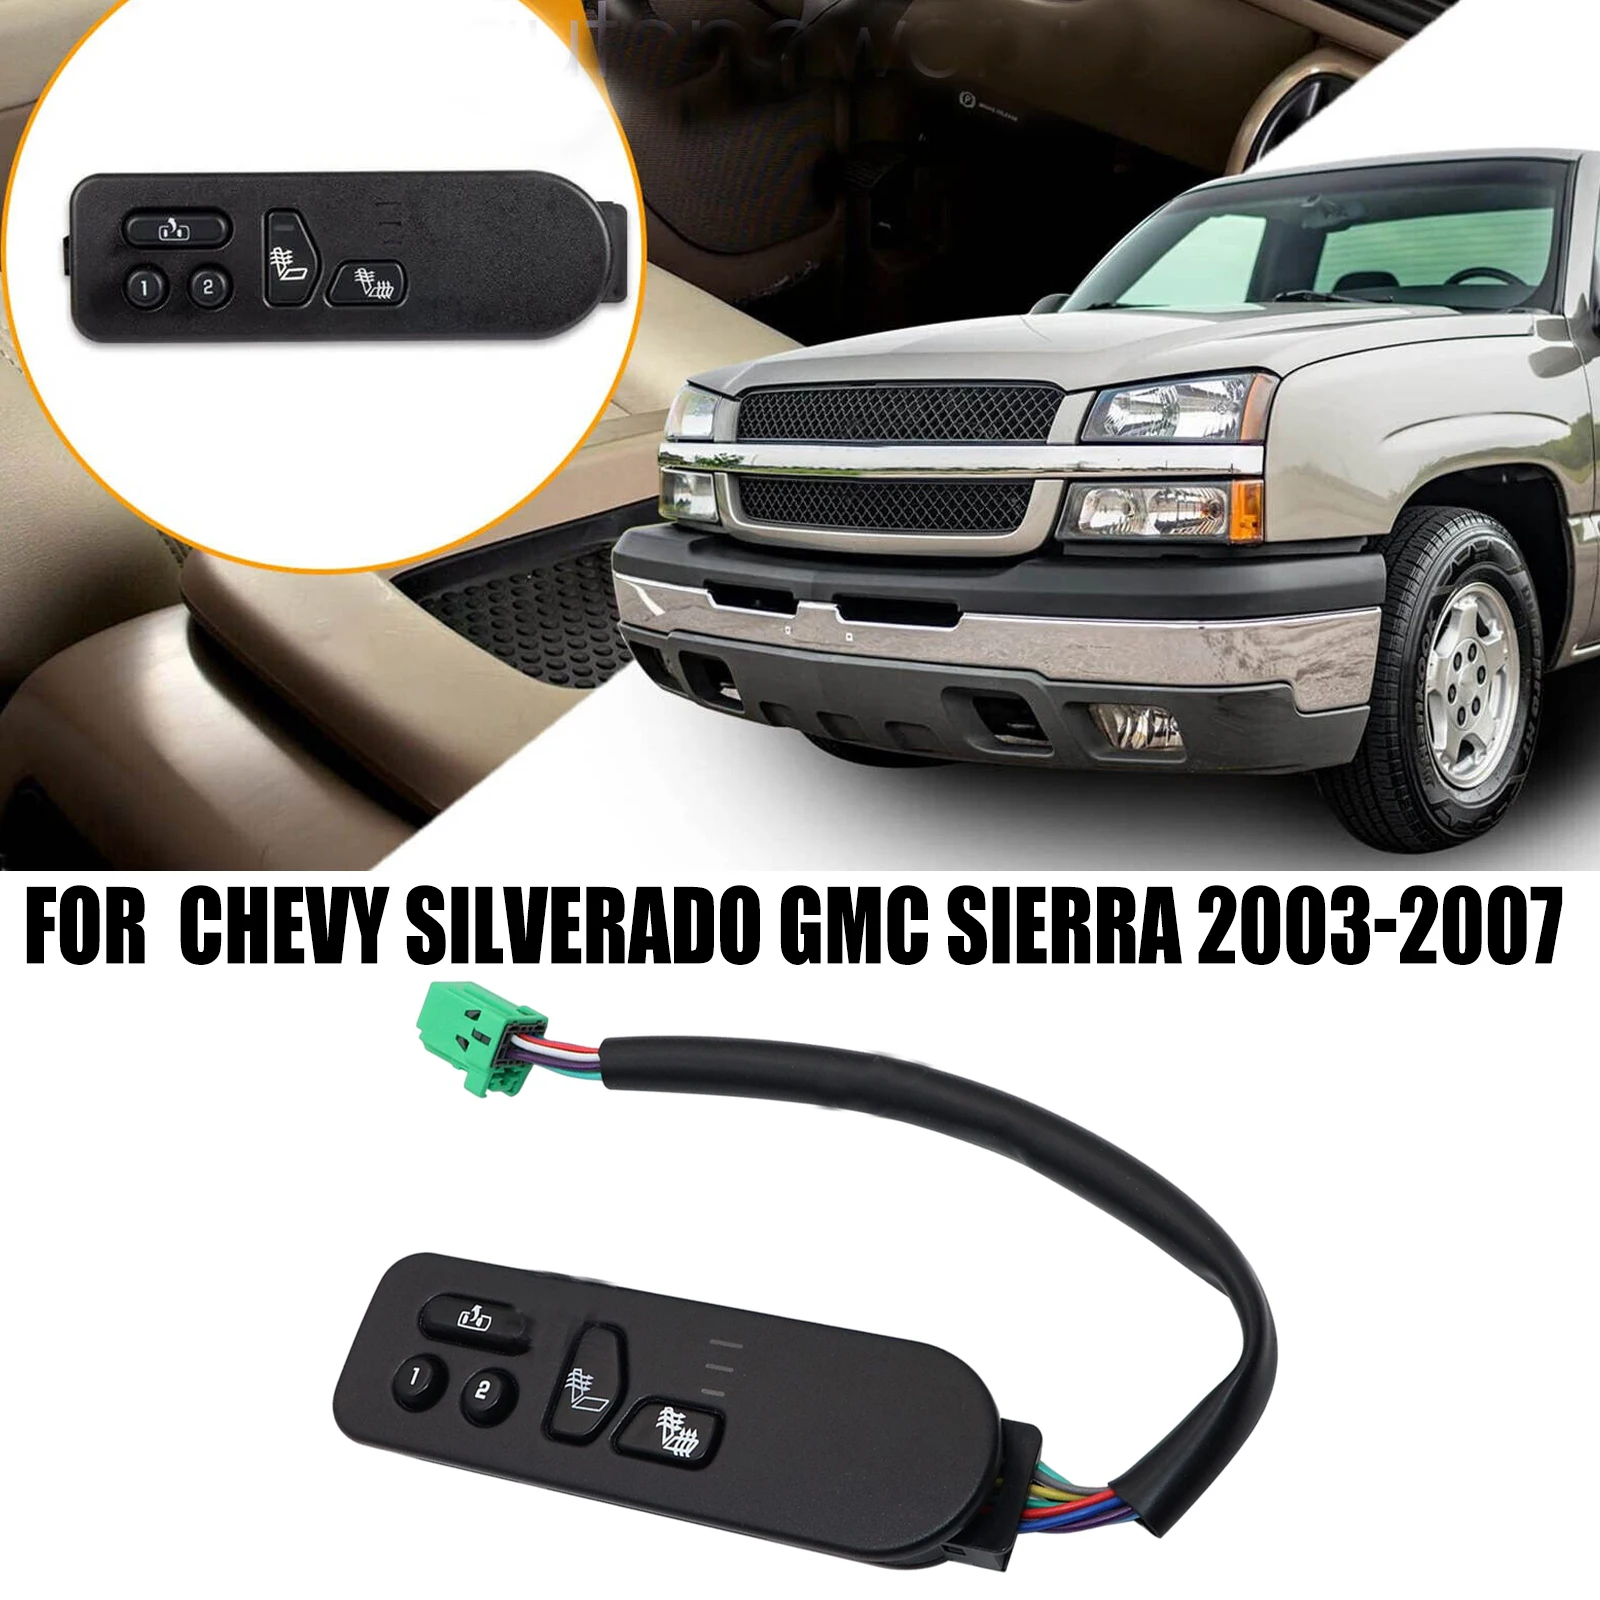 

Power Seat Switch For 2003-2007 Chevy Silverado GMC Sierra Front Left Seat Heater Switch 15179137 15116863 Automotive Parts